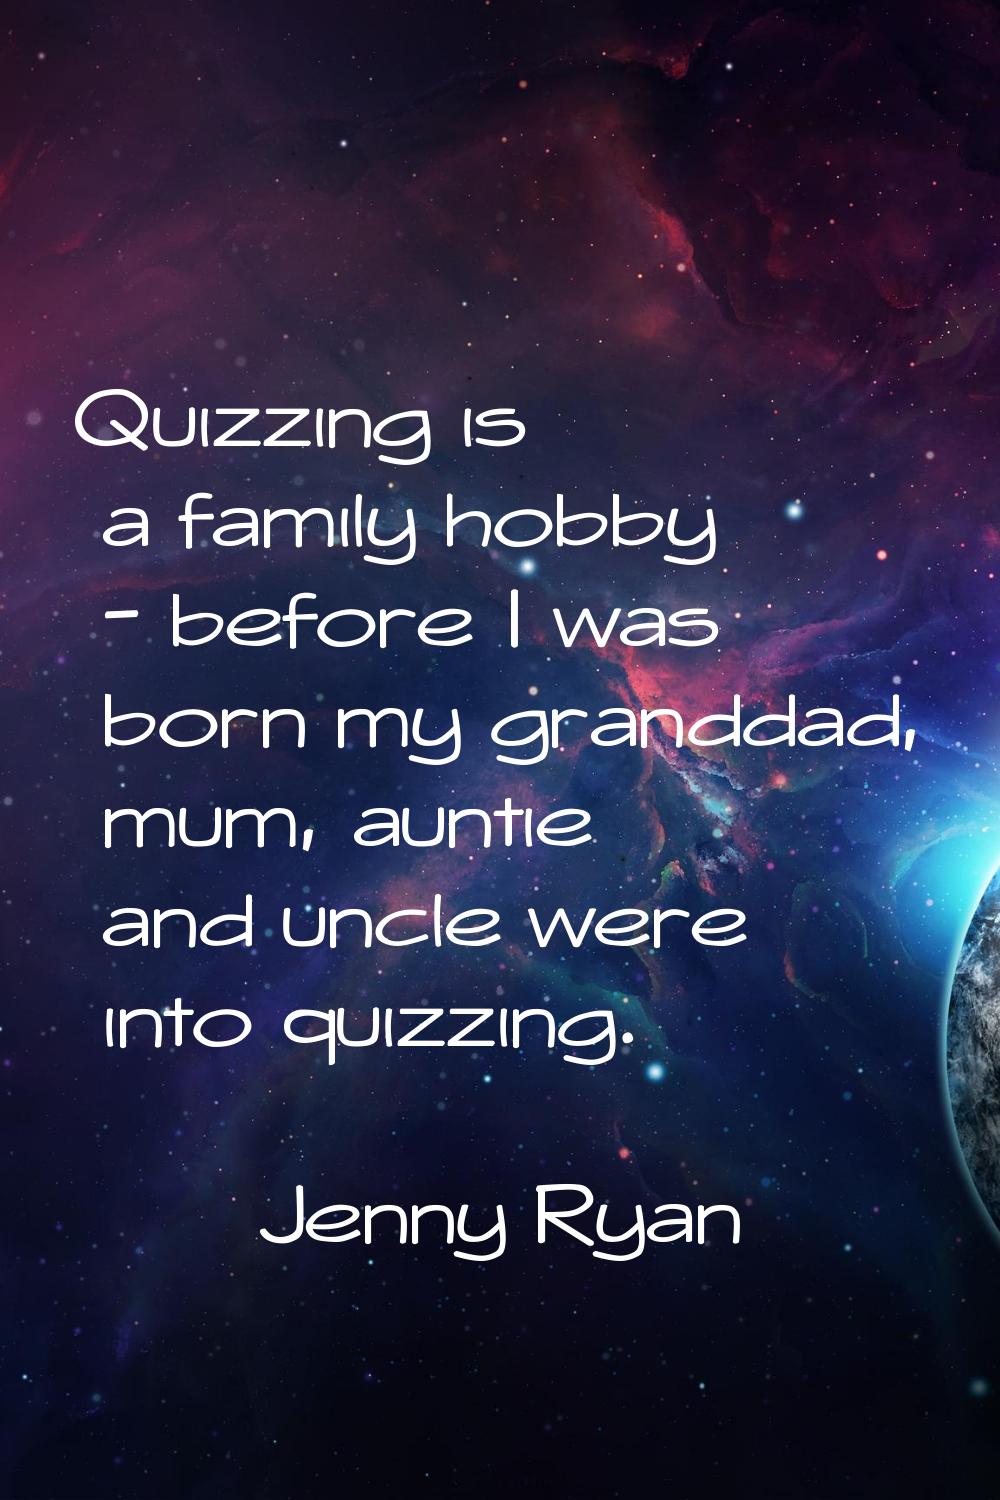 Quizzing is a family hobby - before I was born my granddad, mum, auntie and uncle were into quizzin